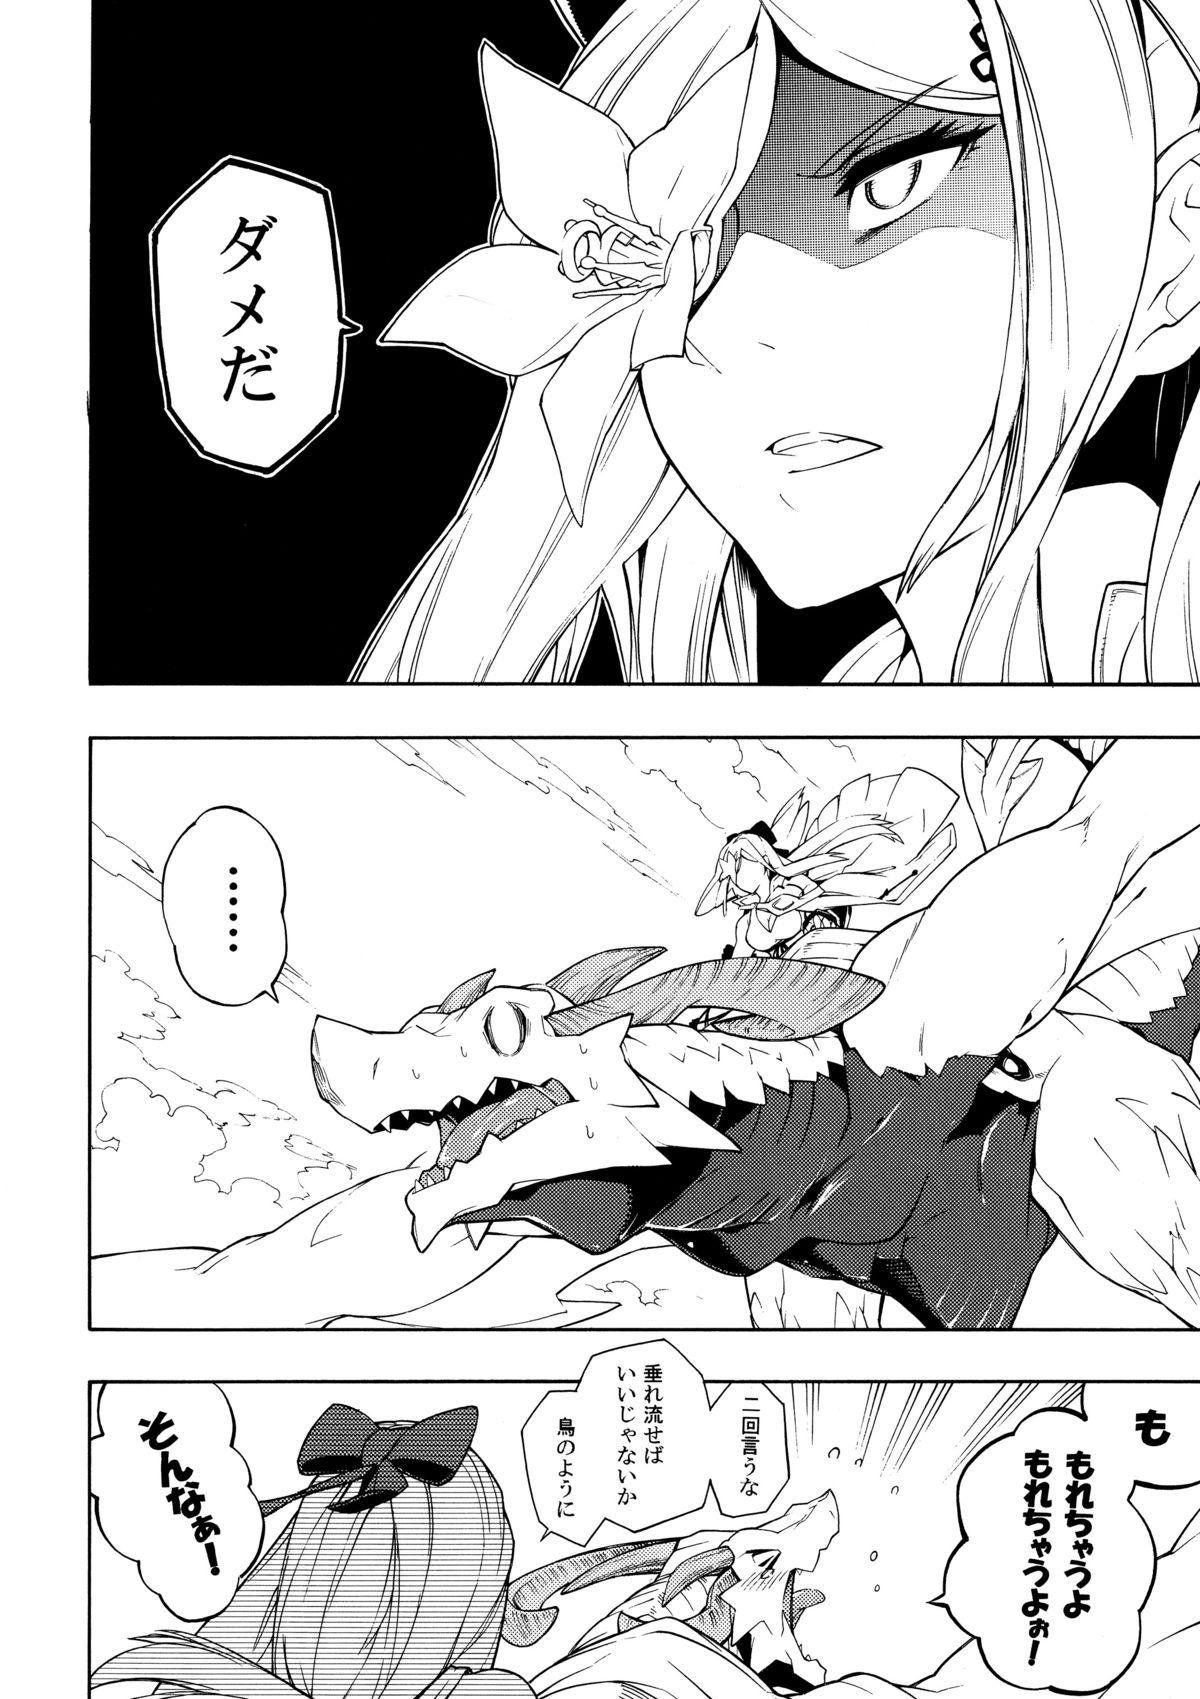 Hot Girl MIKHAIL FORTUNE - Drakengard Sex Party - Page 7